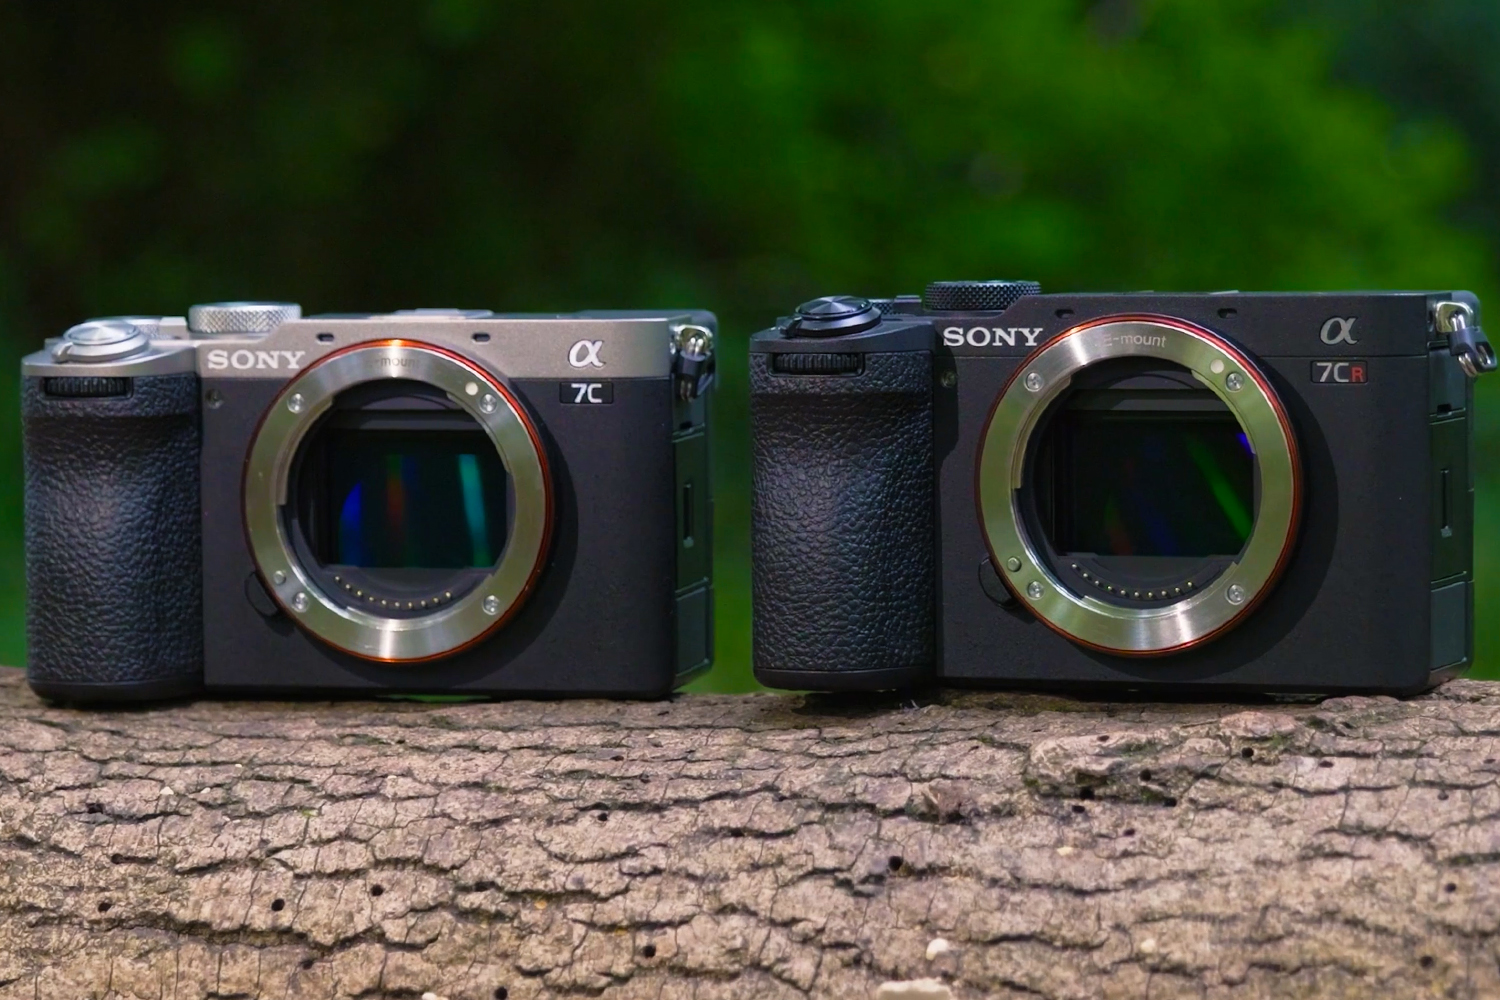 SONY A7C II & A7CR | SMALL, COMPACT AND FULL-FRAME WITH UP TO 61 MP